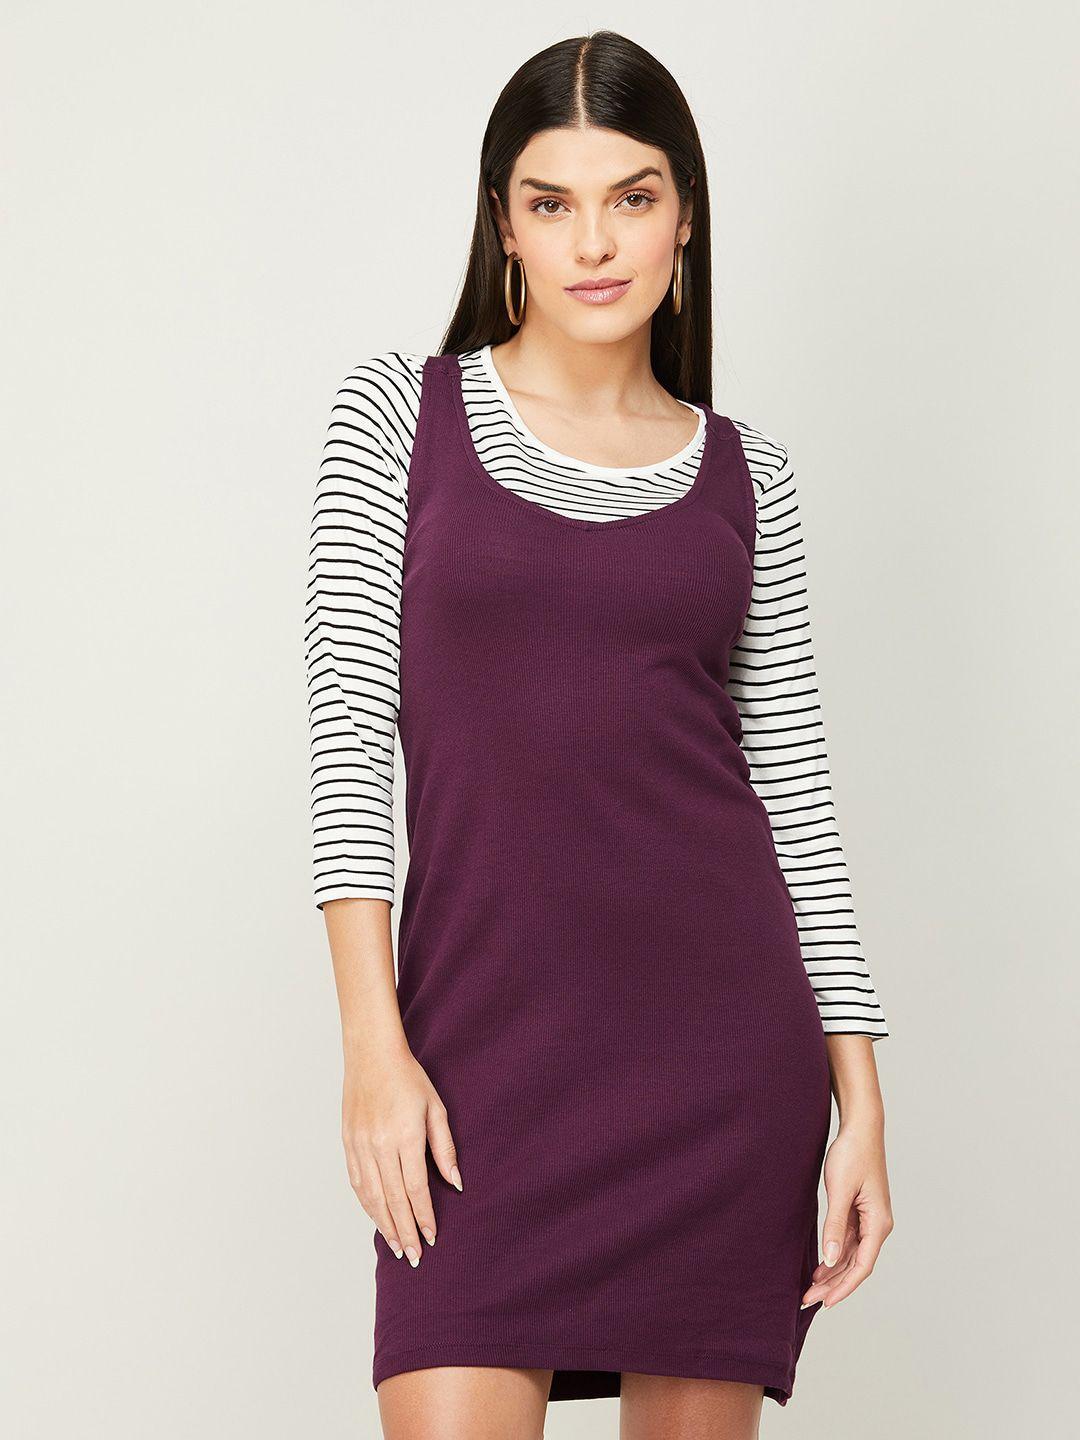 code by lifestyle striped printed top with cotton sheath dress